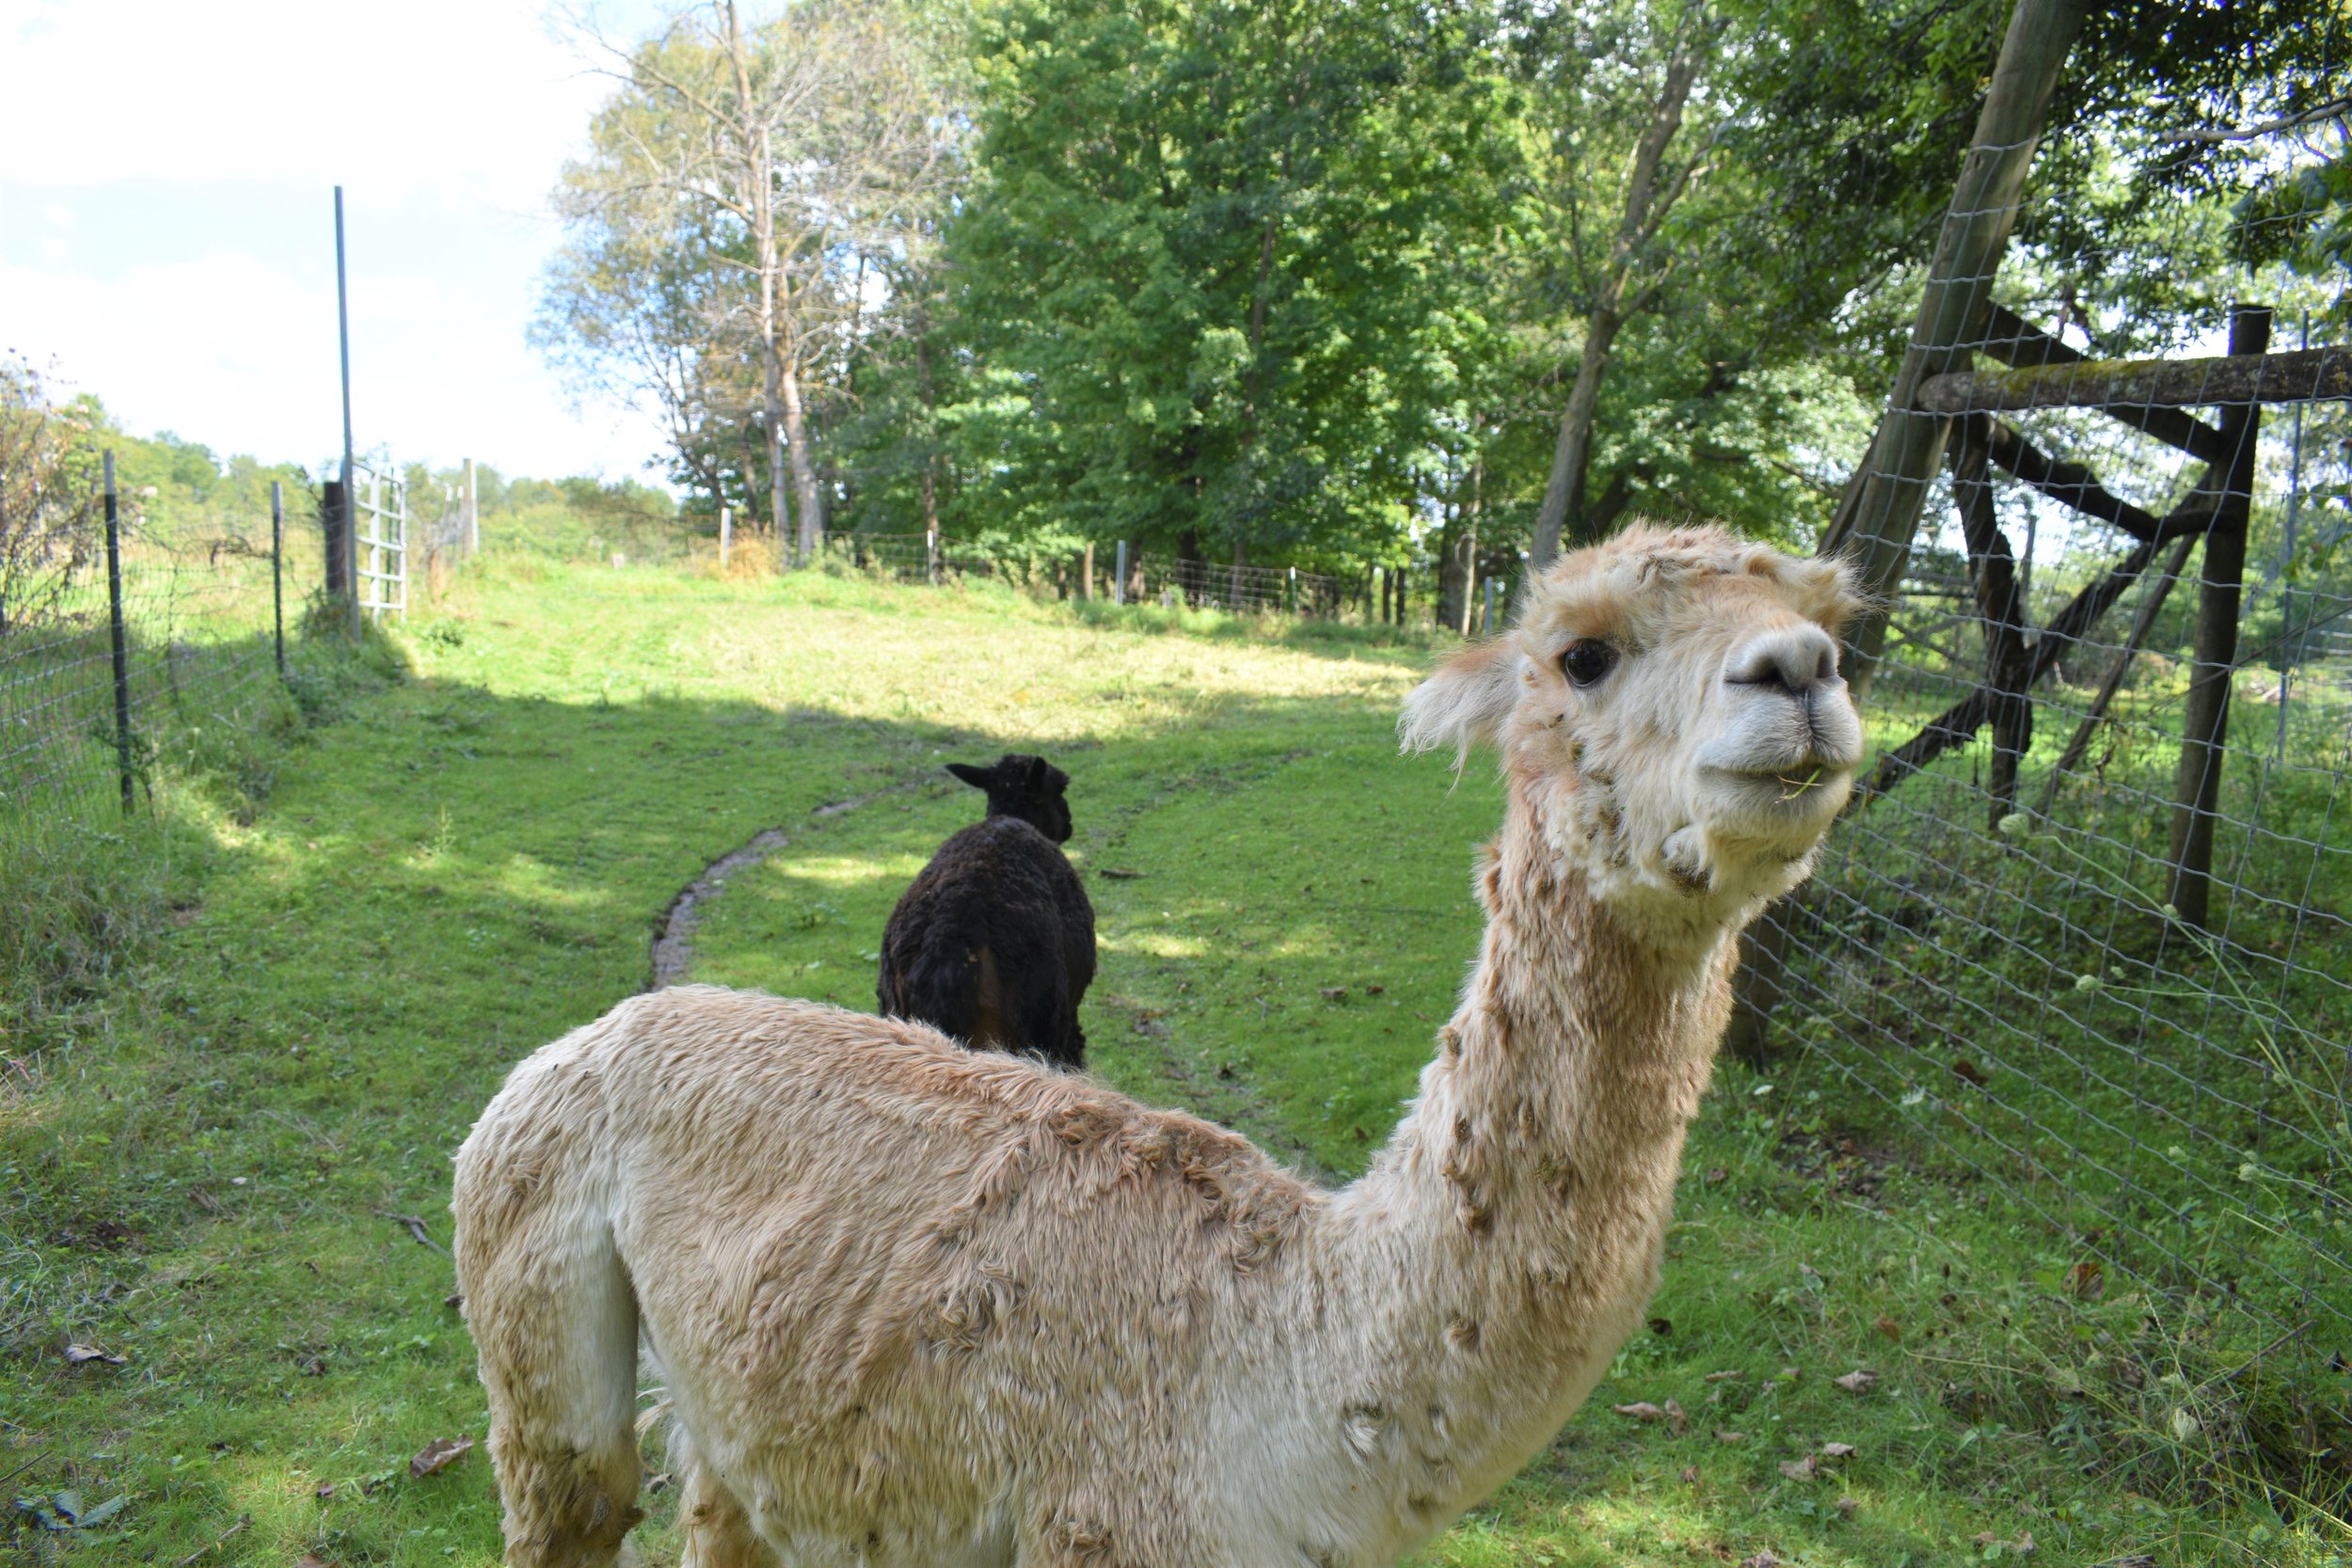  The Alpacas, Tigger with Budda in the background. 